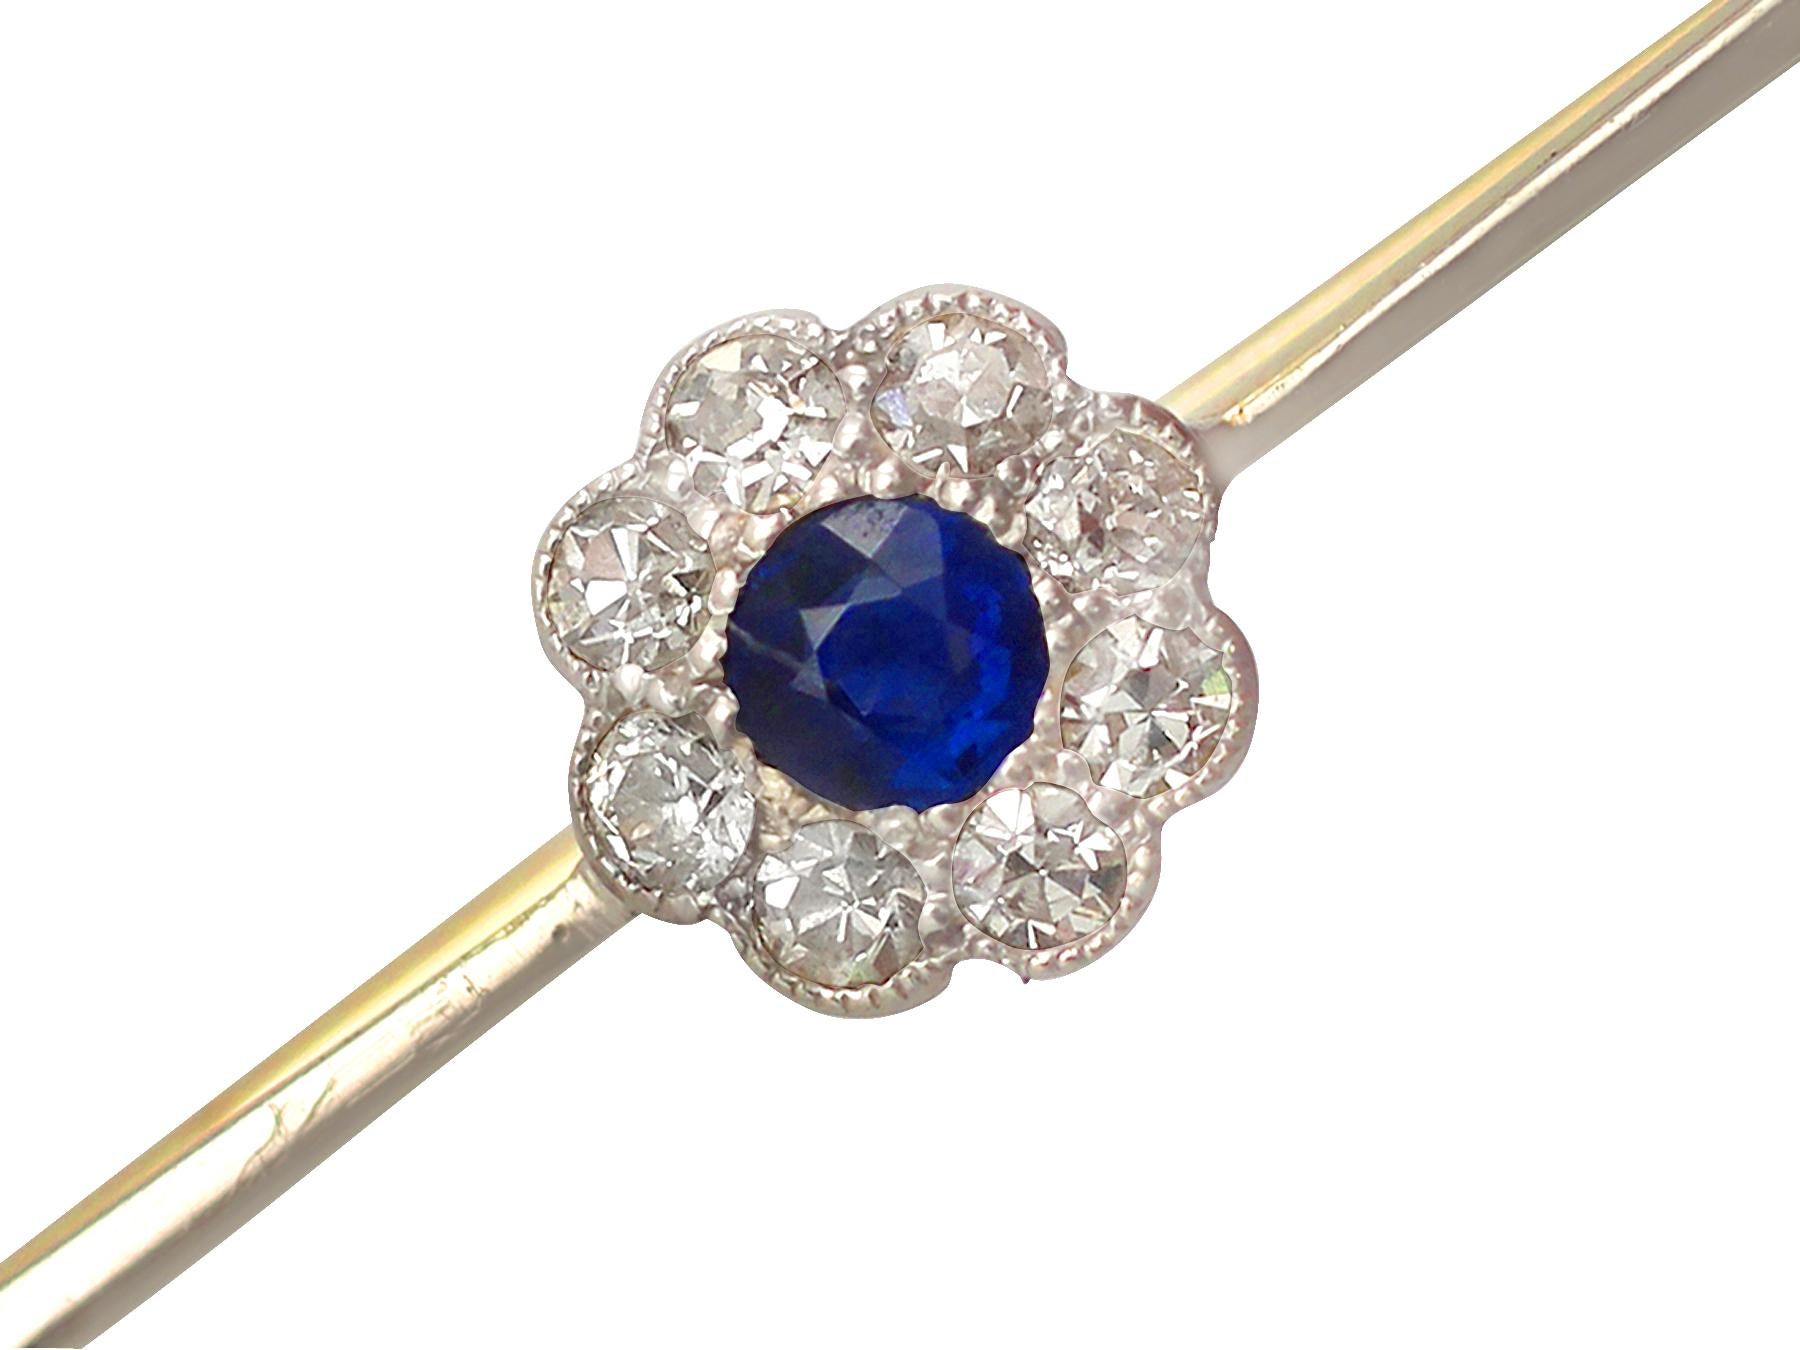 A fine and impressive 0.16 carat natural blue sapphire and 0.26 carat diamond cluster set, 15 karat yellow gold, platinum set bar brooch; part of our diverse antique jewelry and estate jewelry collections.

This fine and impressive sapphire and